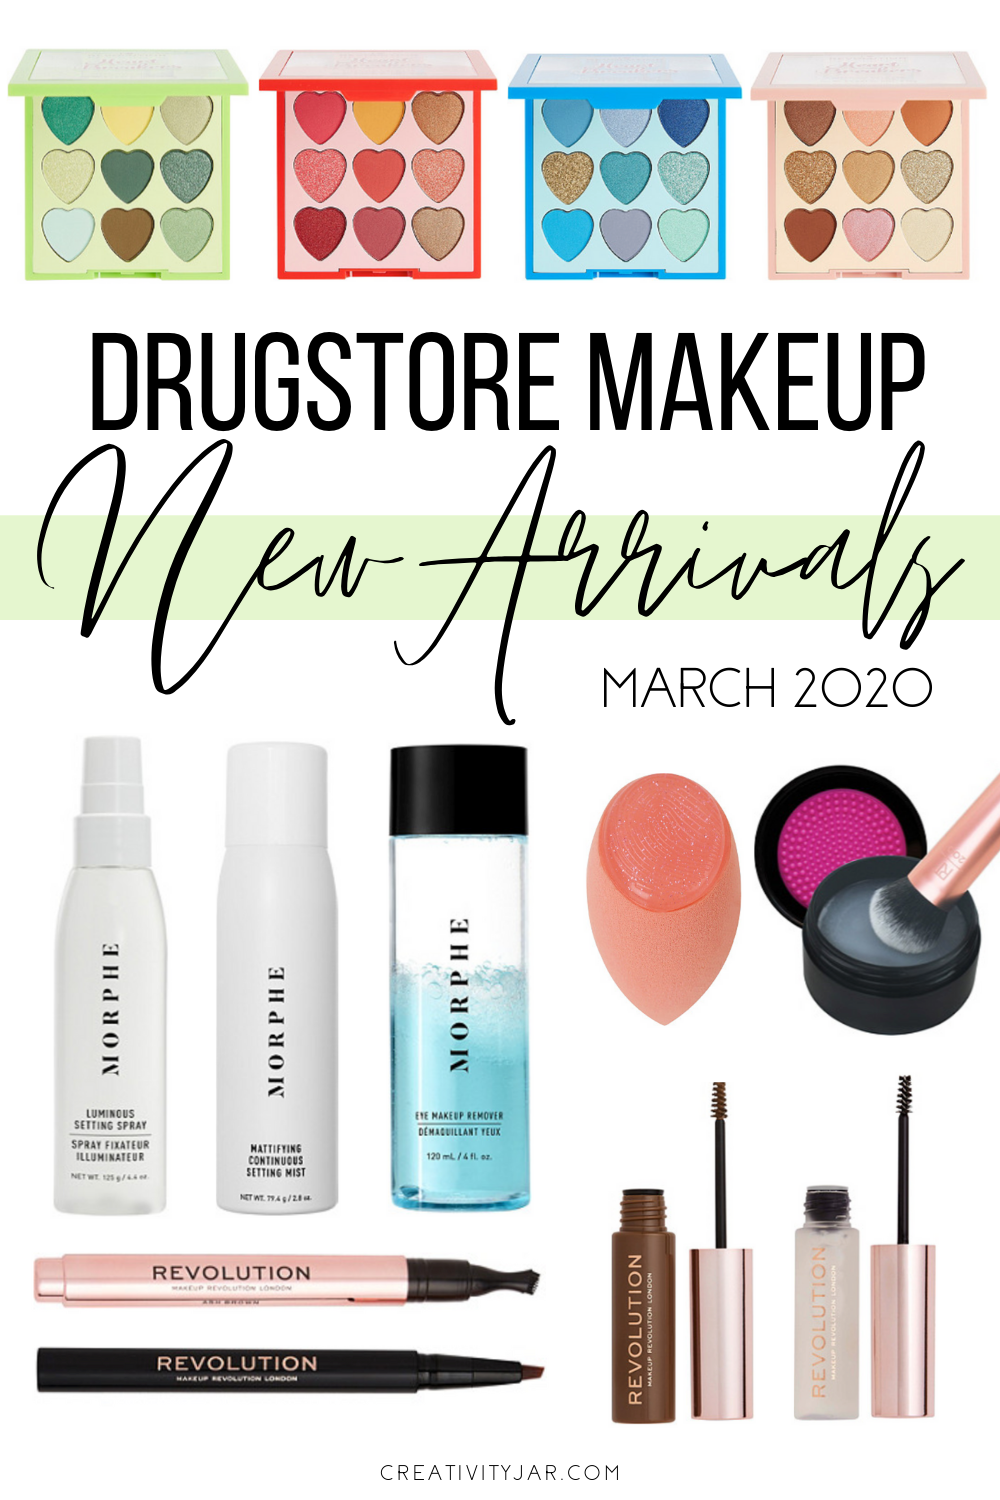 New Drugstore Makeup March 2020